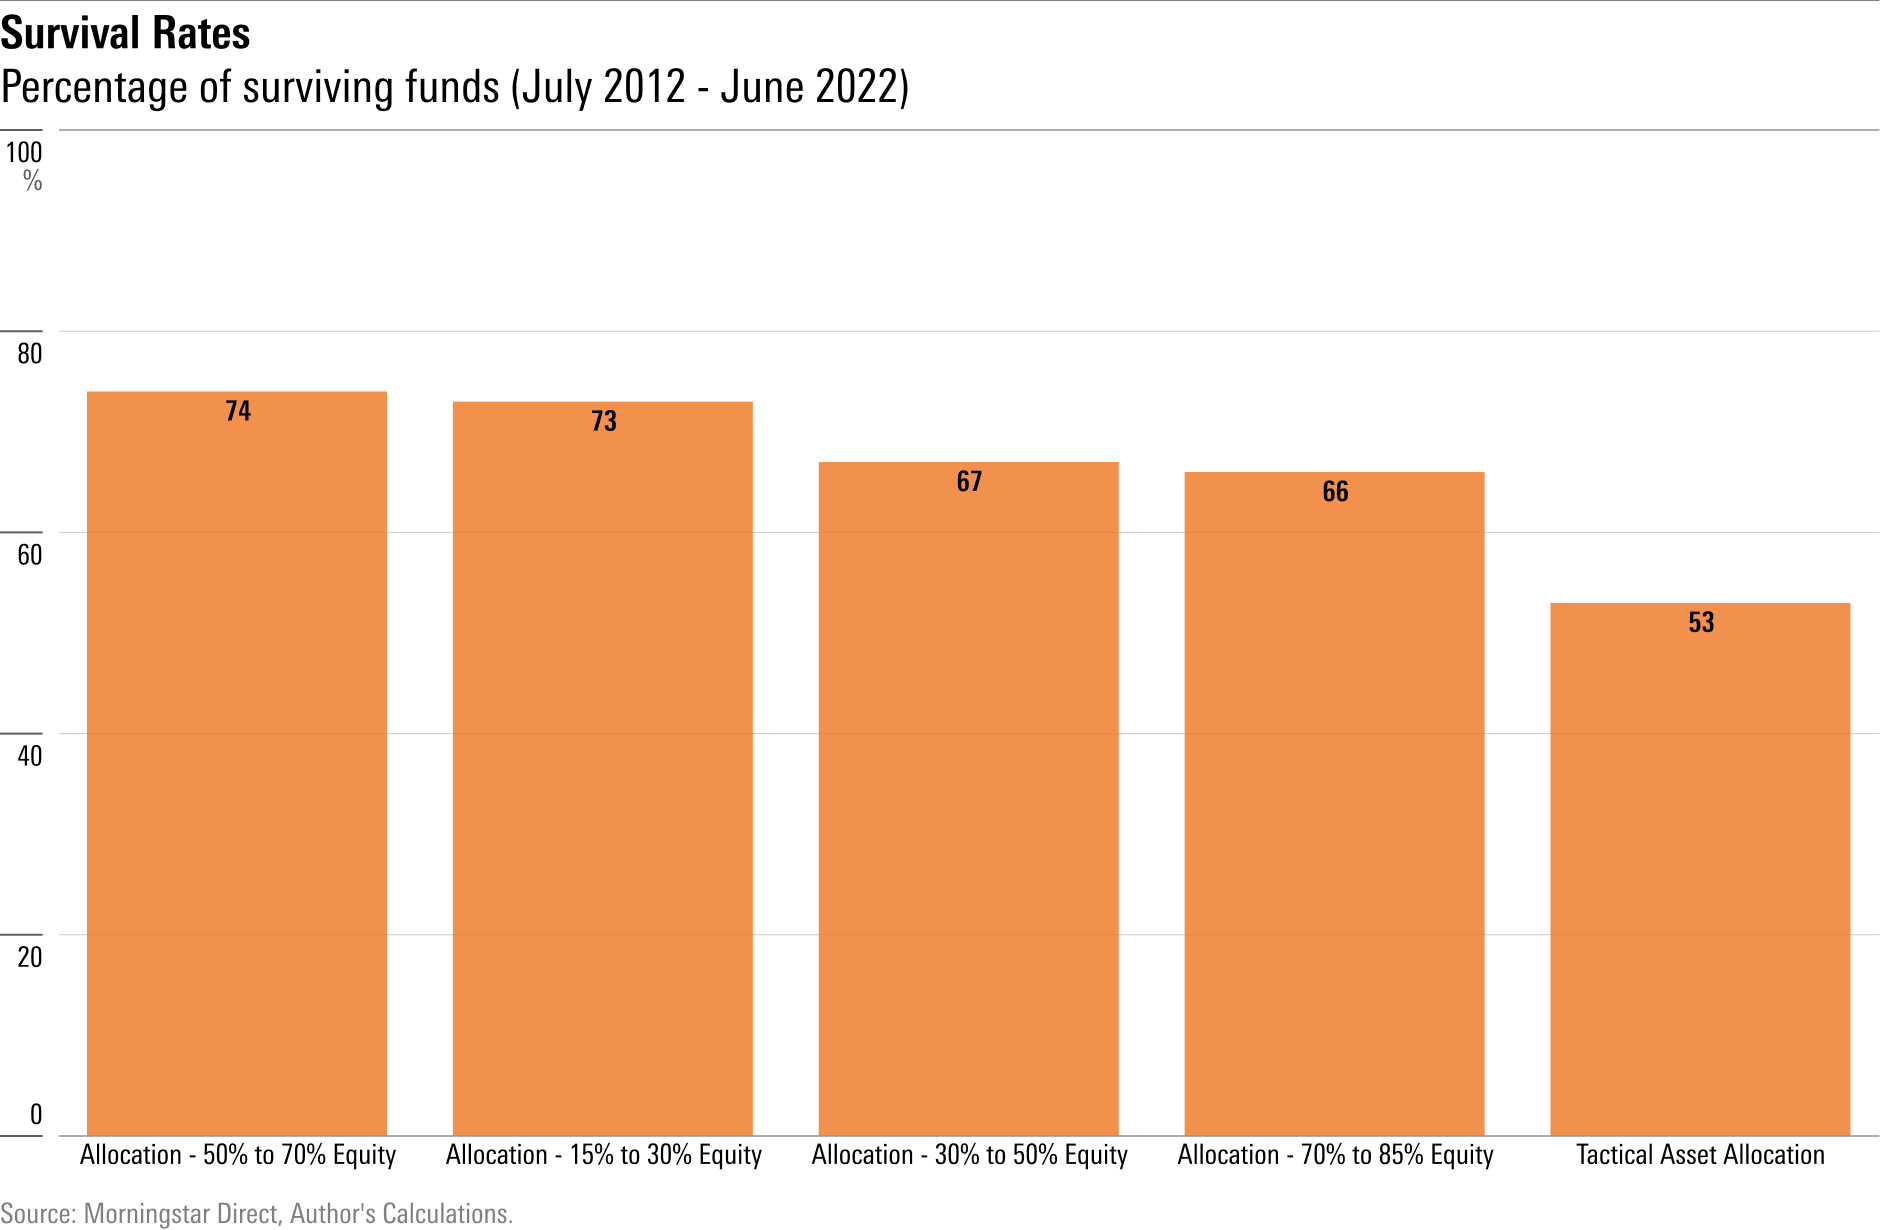 The percentage of tactical funds in each category that survived the 2012-2022 period.  Tactical funds were more likely to disappear than other allocation funds.